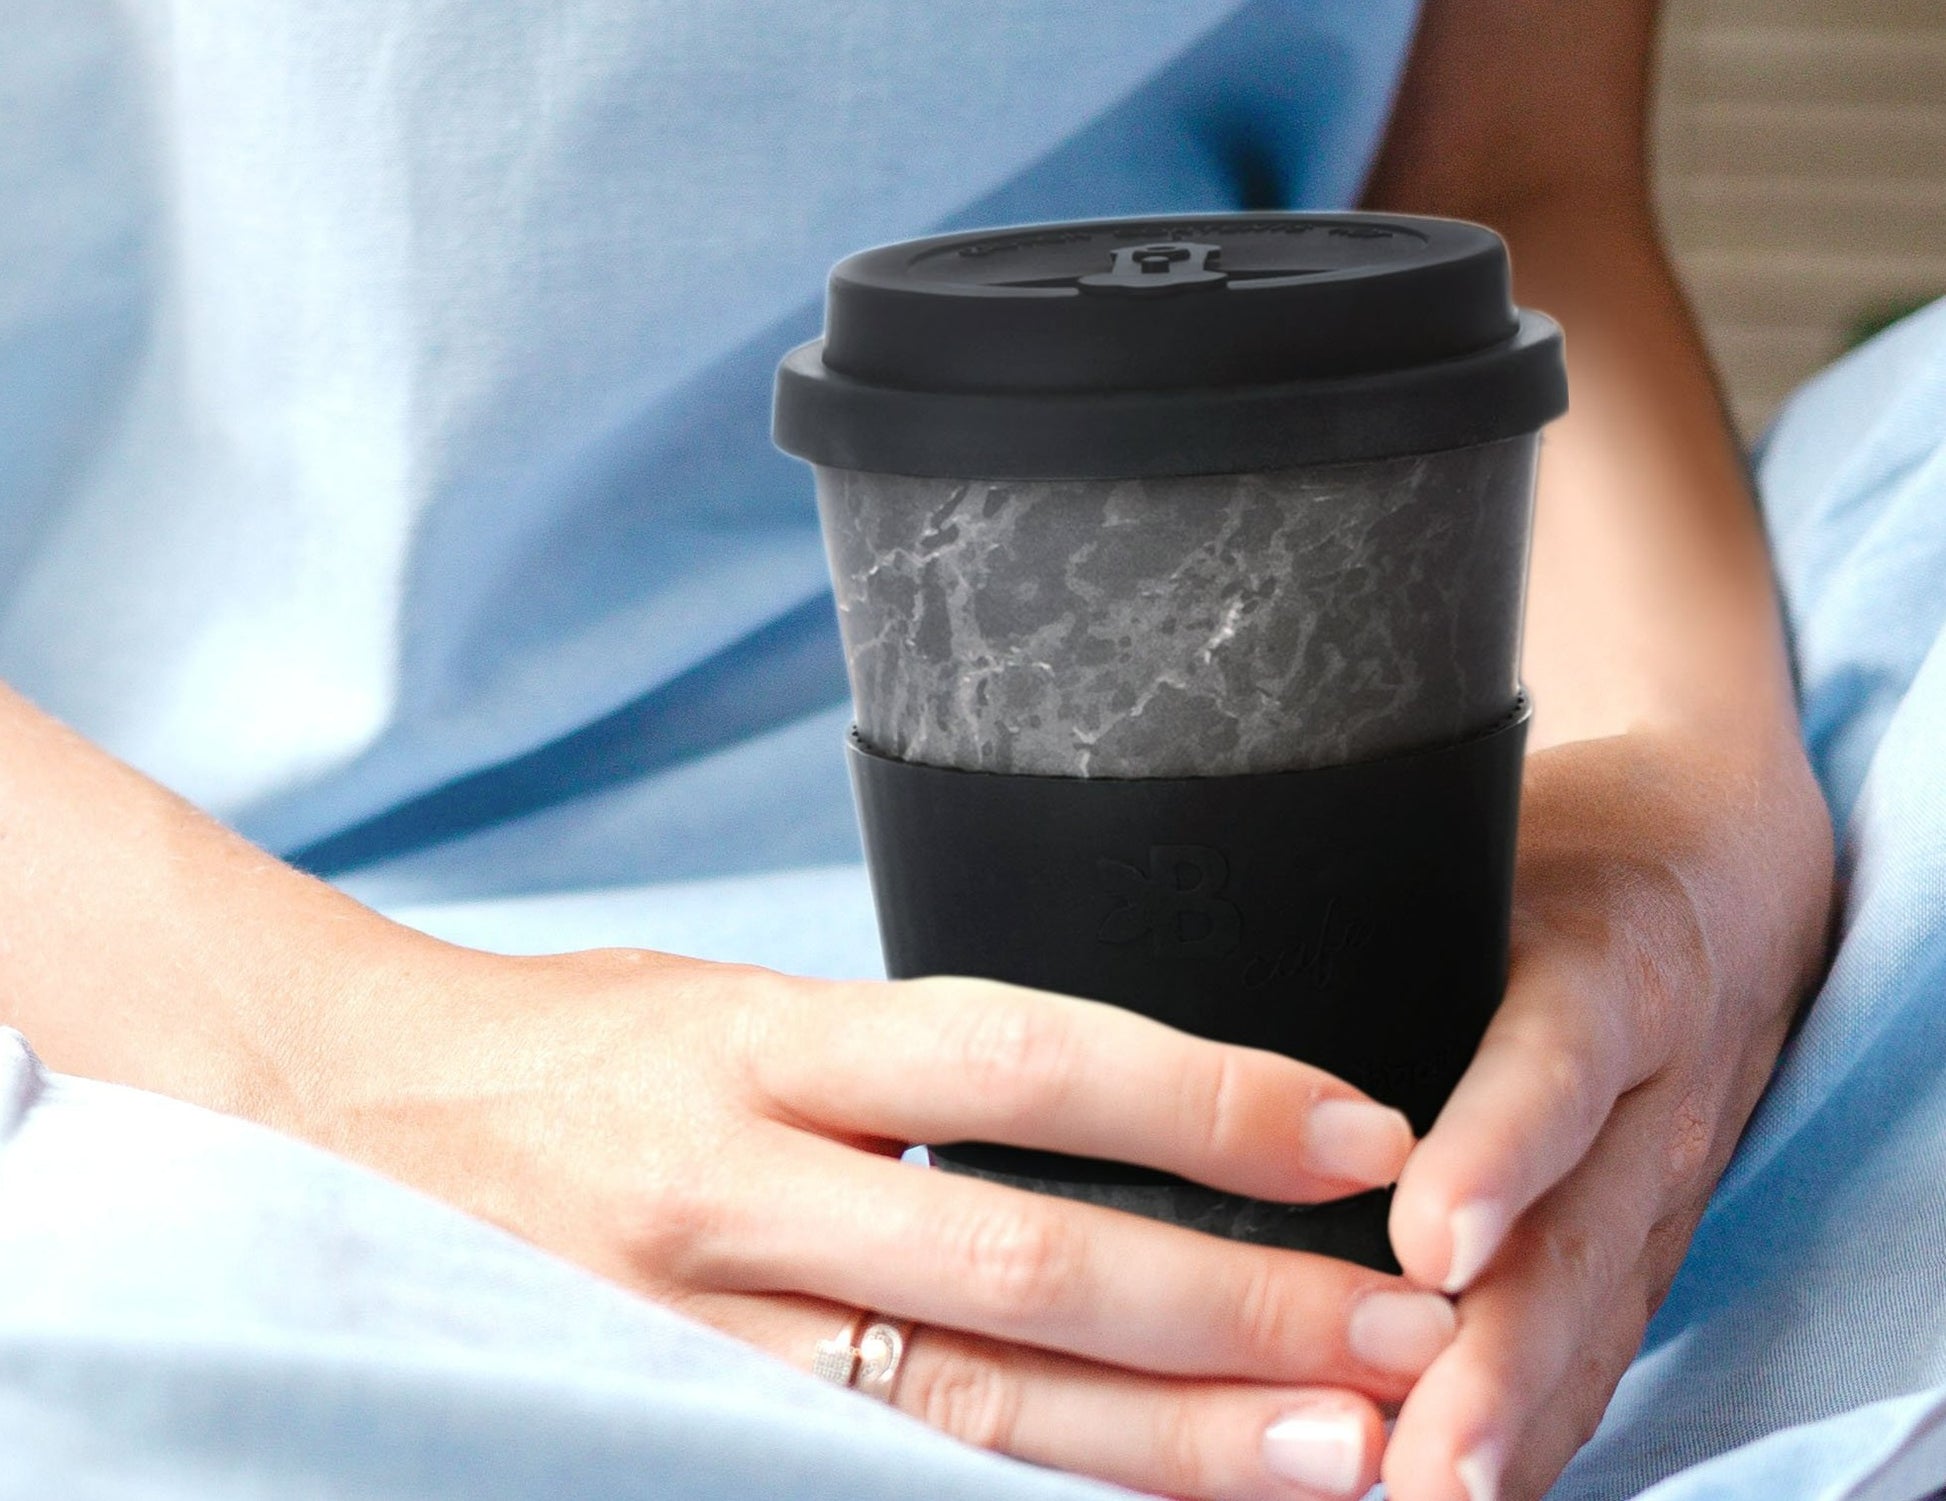  The future is bamboo - Reusable Coffee Cup Eco Friendly Bamboo  Fibe Coffee Tumbler and Travel Mug with Leak-Proof Cup Cover, 16oz, Onyx  Marble